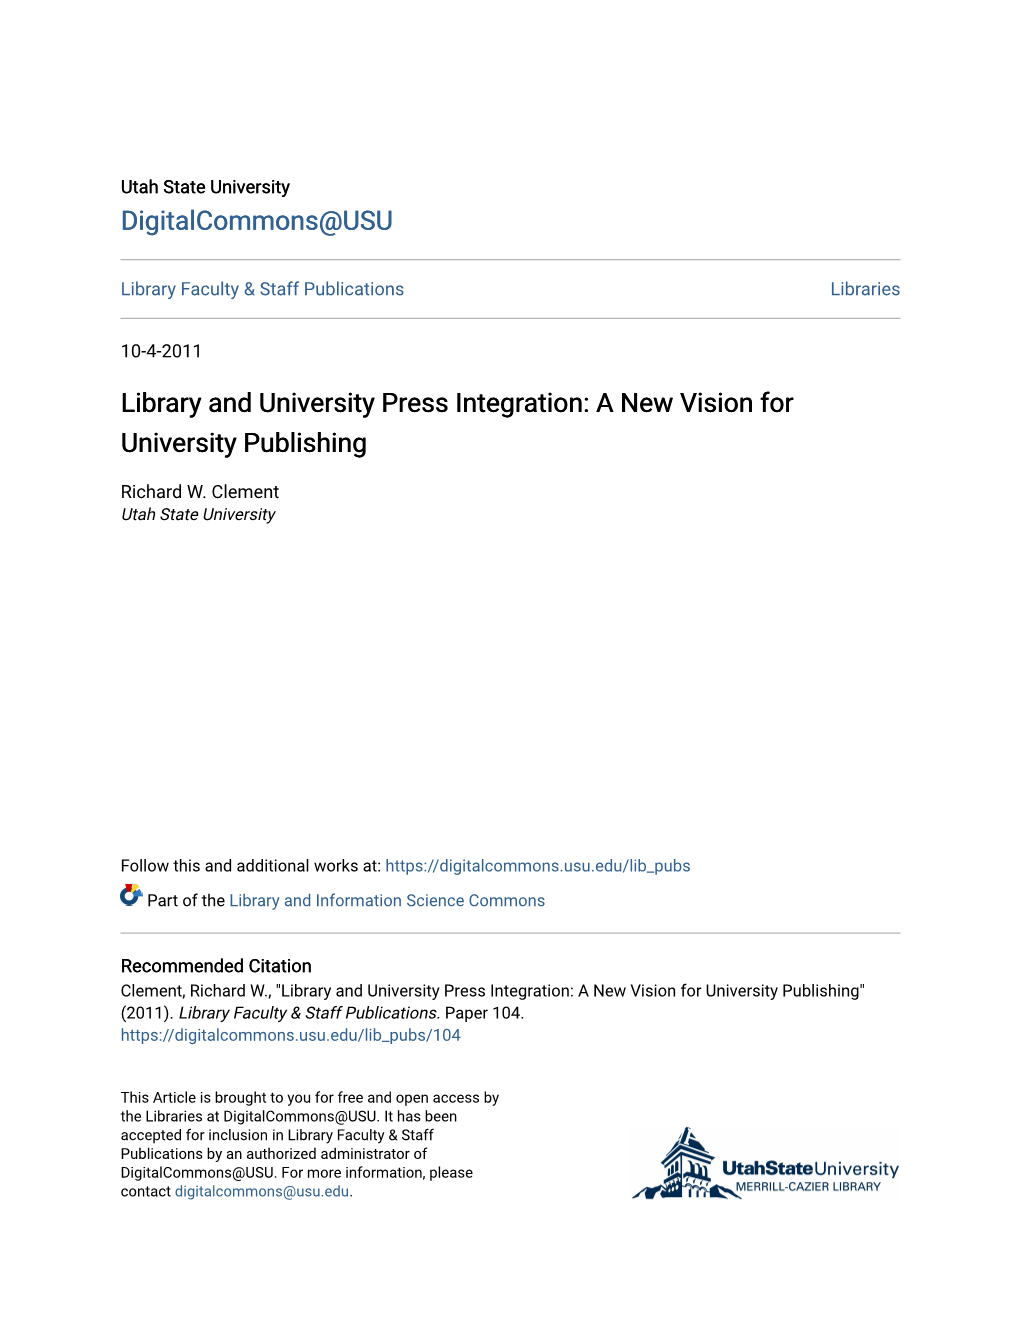 Library and University Press Integration: a New Vision for University Publishing